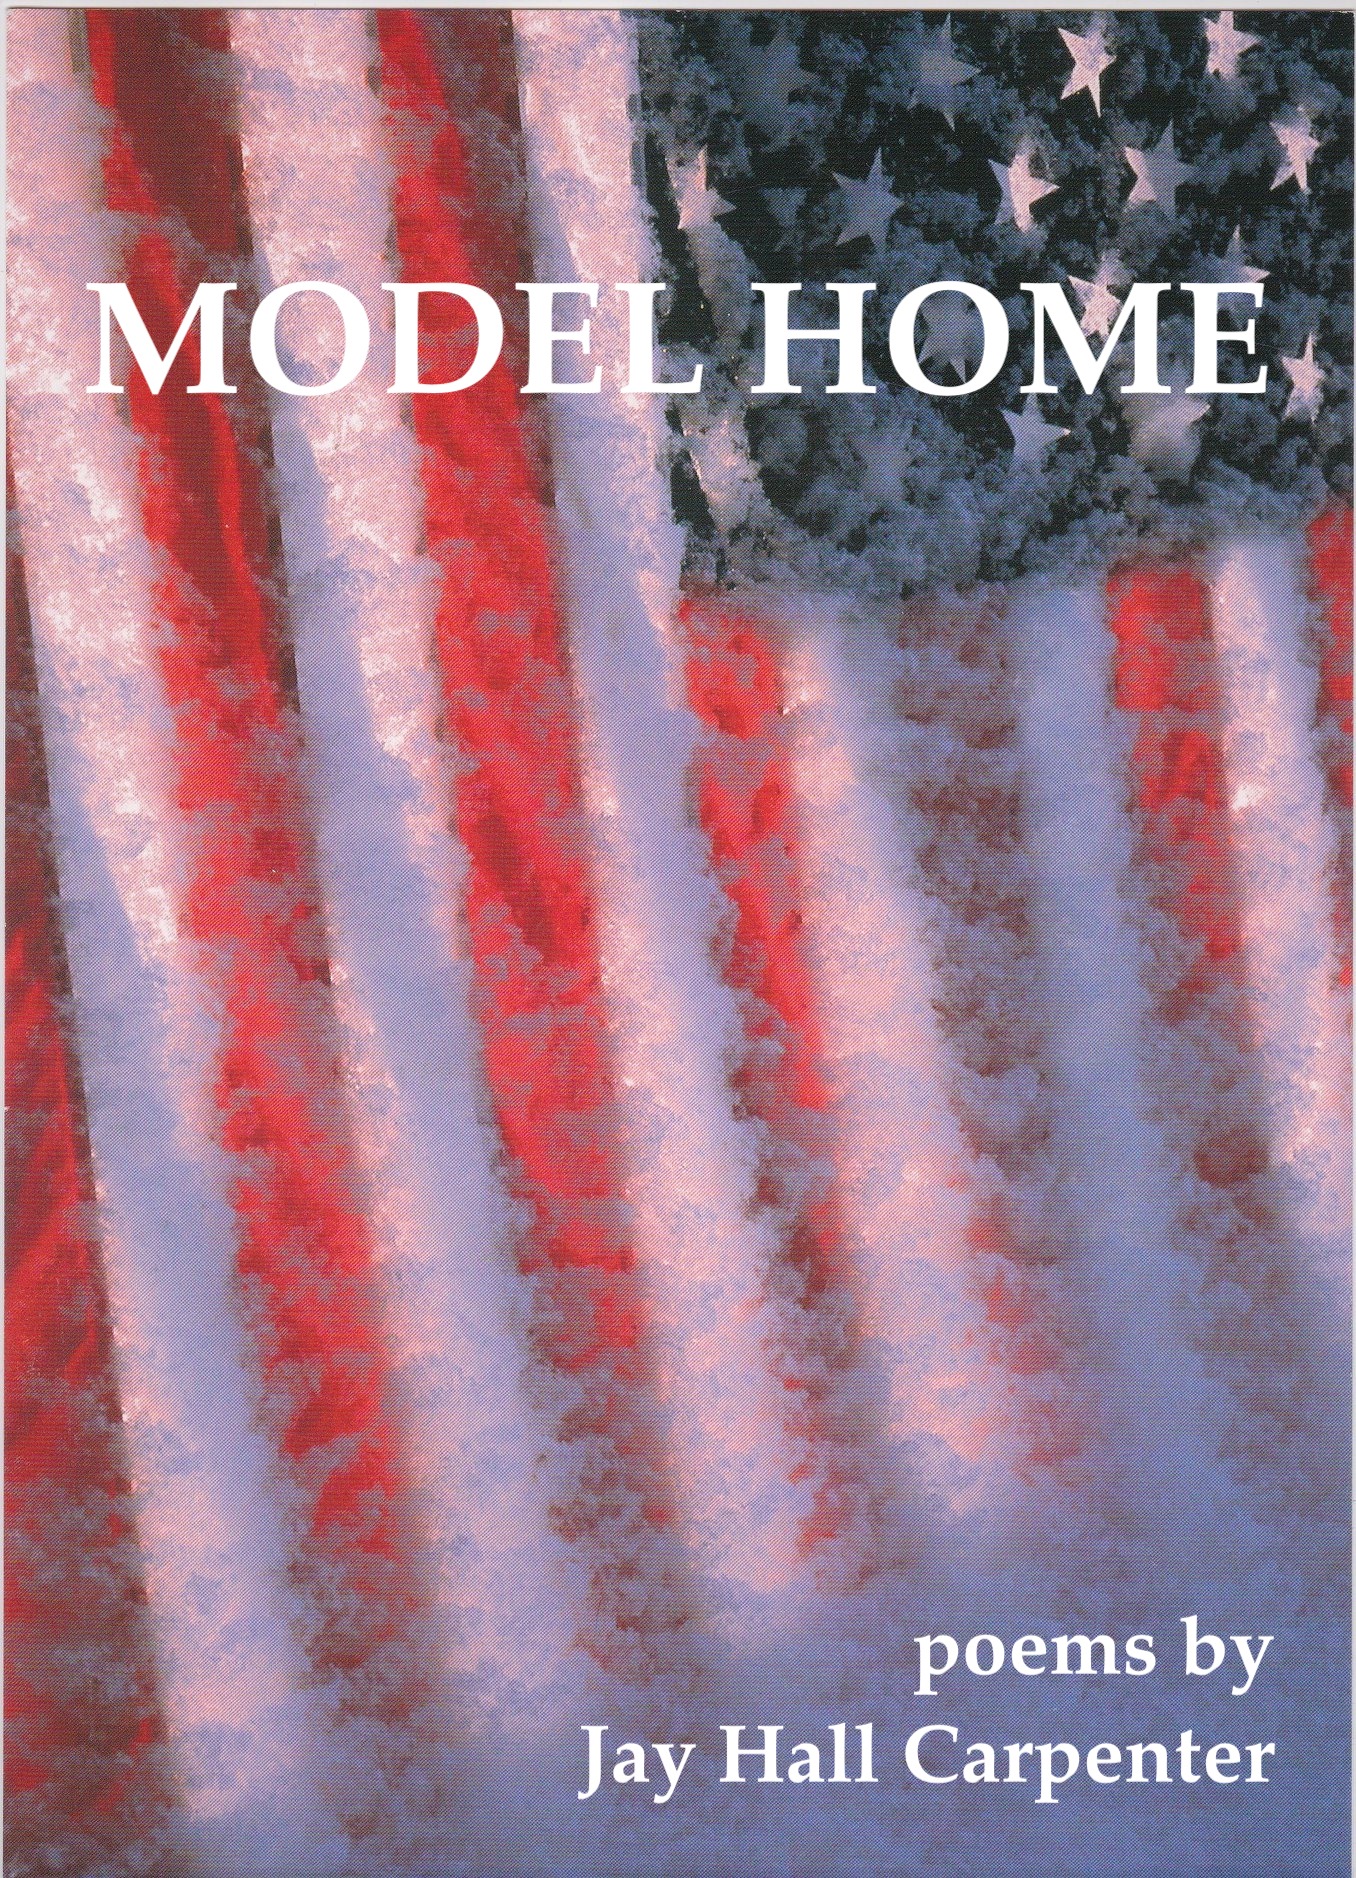 New from Carpenter Press:  Model Home, Poems